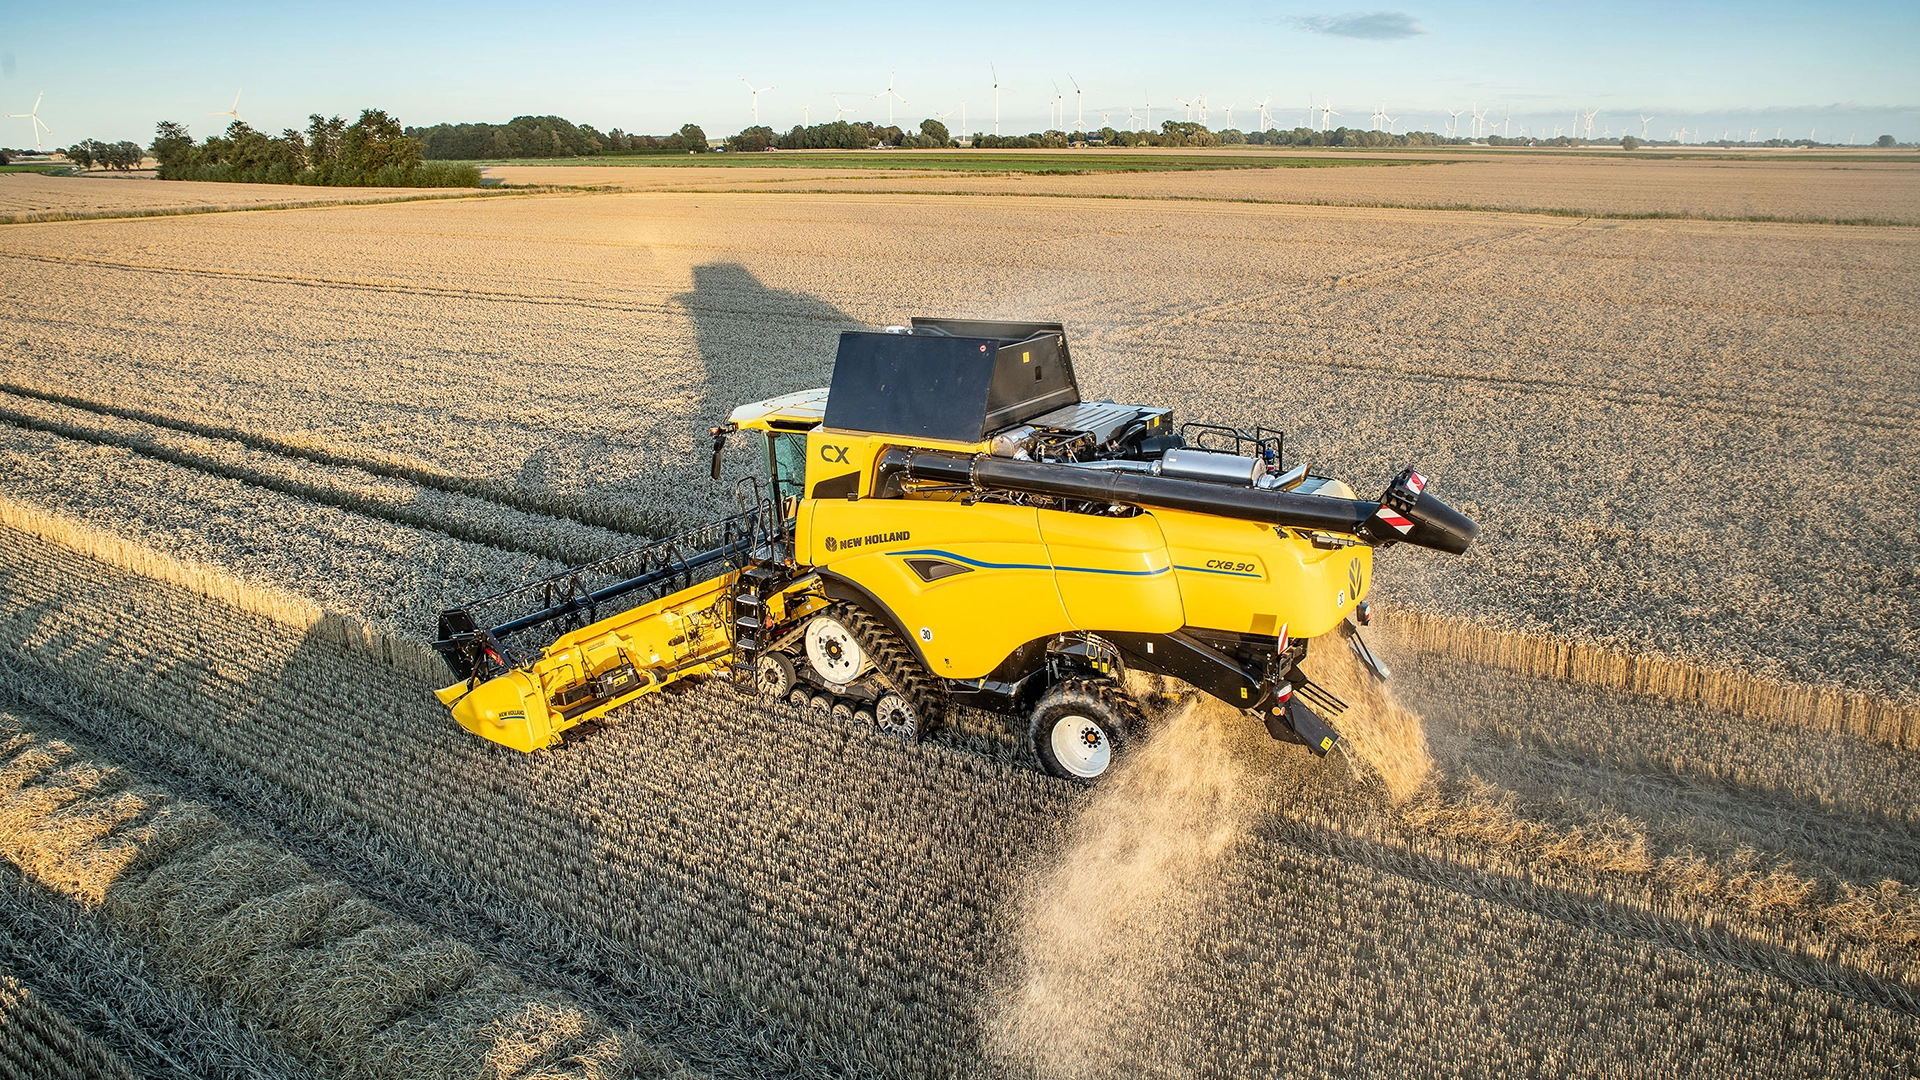 CX7 ＆ CX8 Combine Harvesters in action